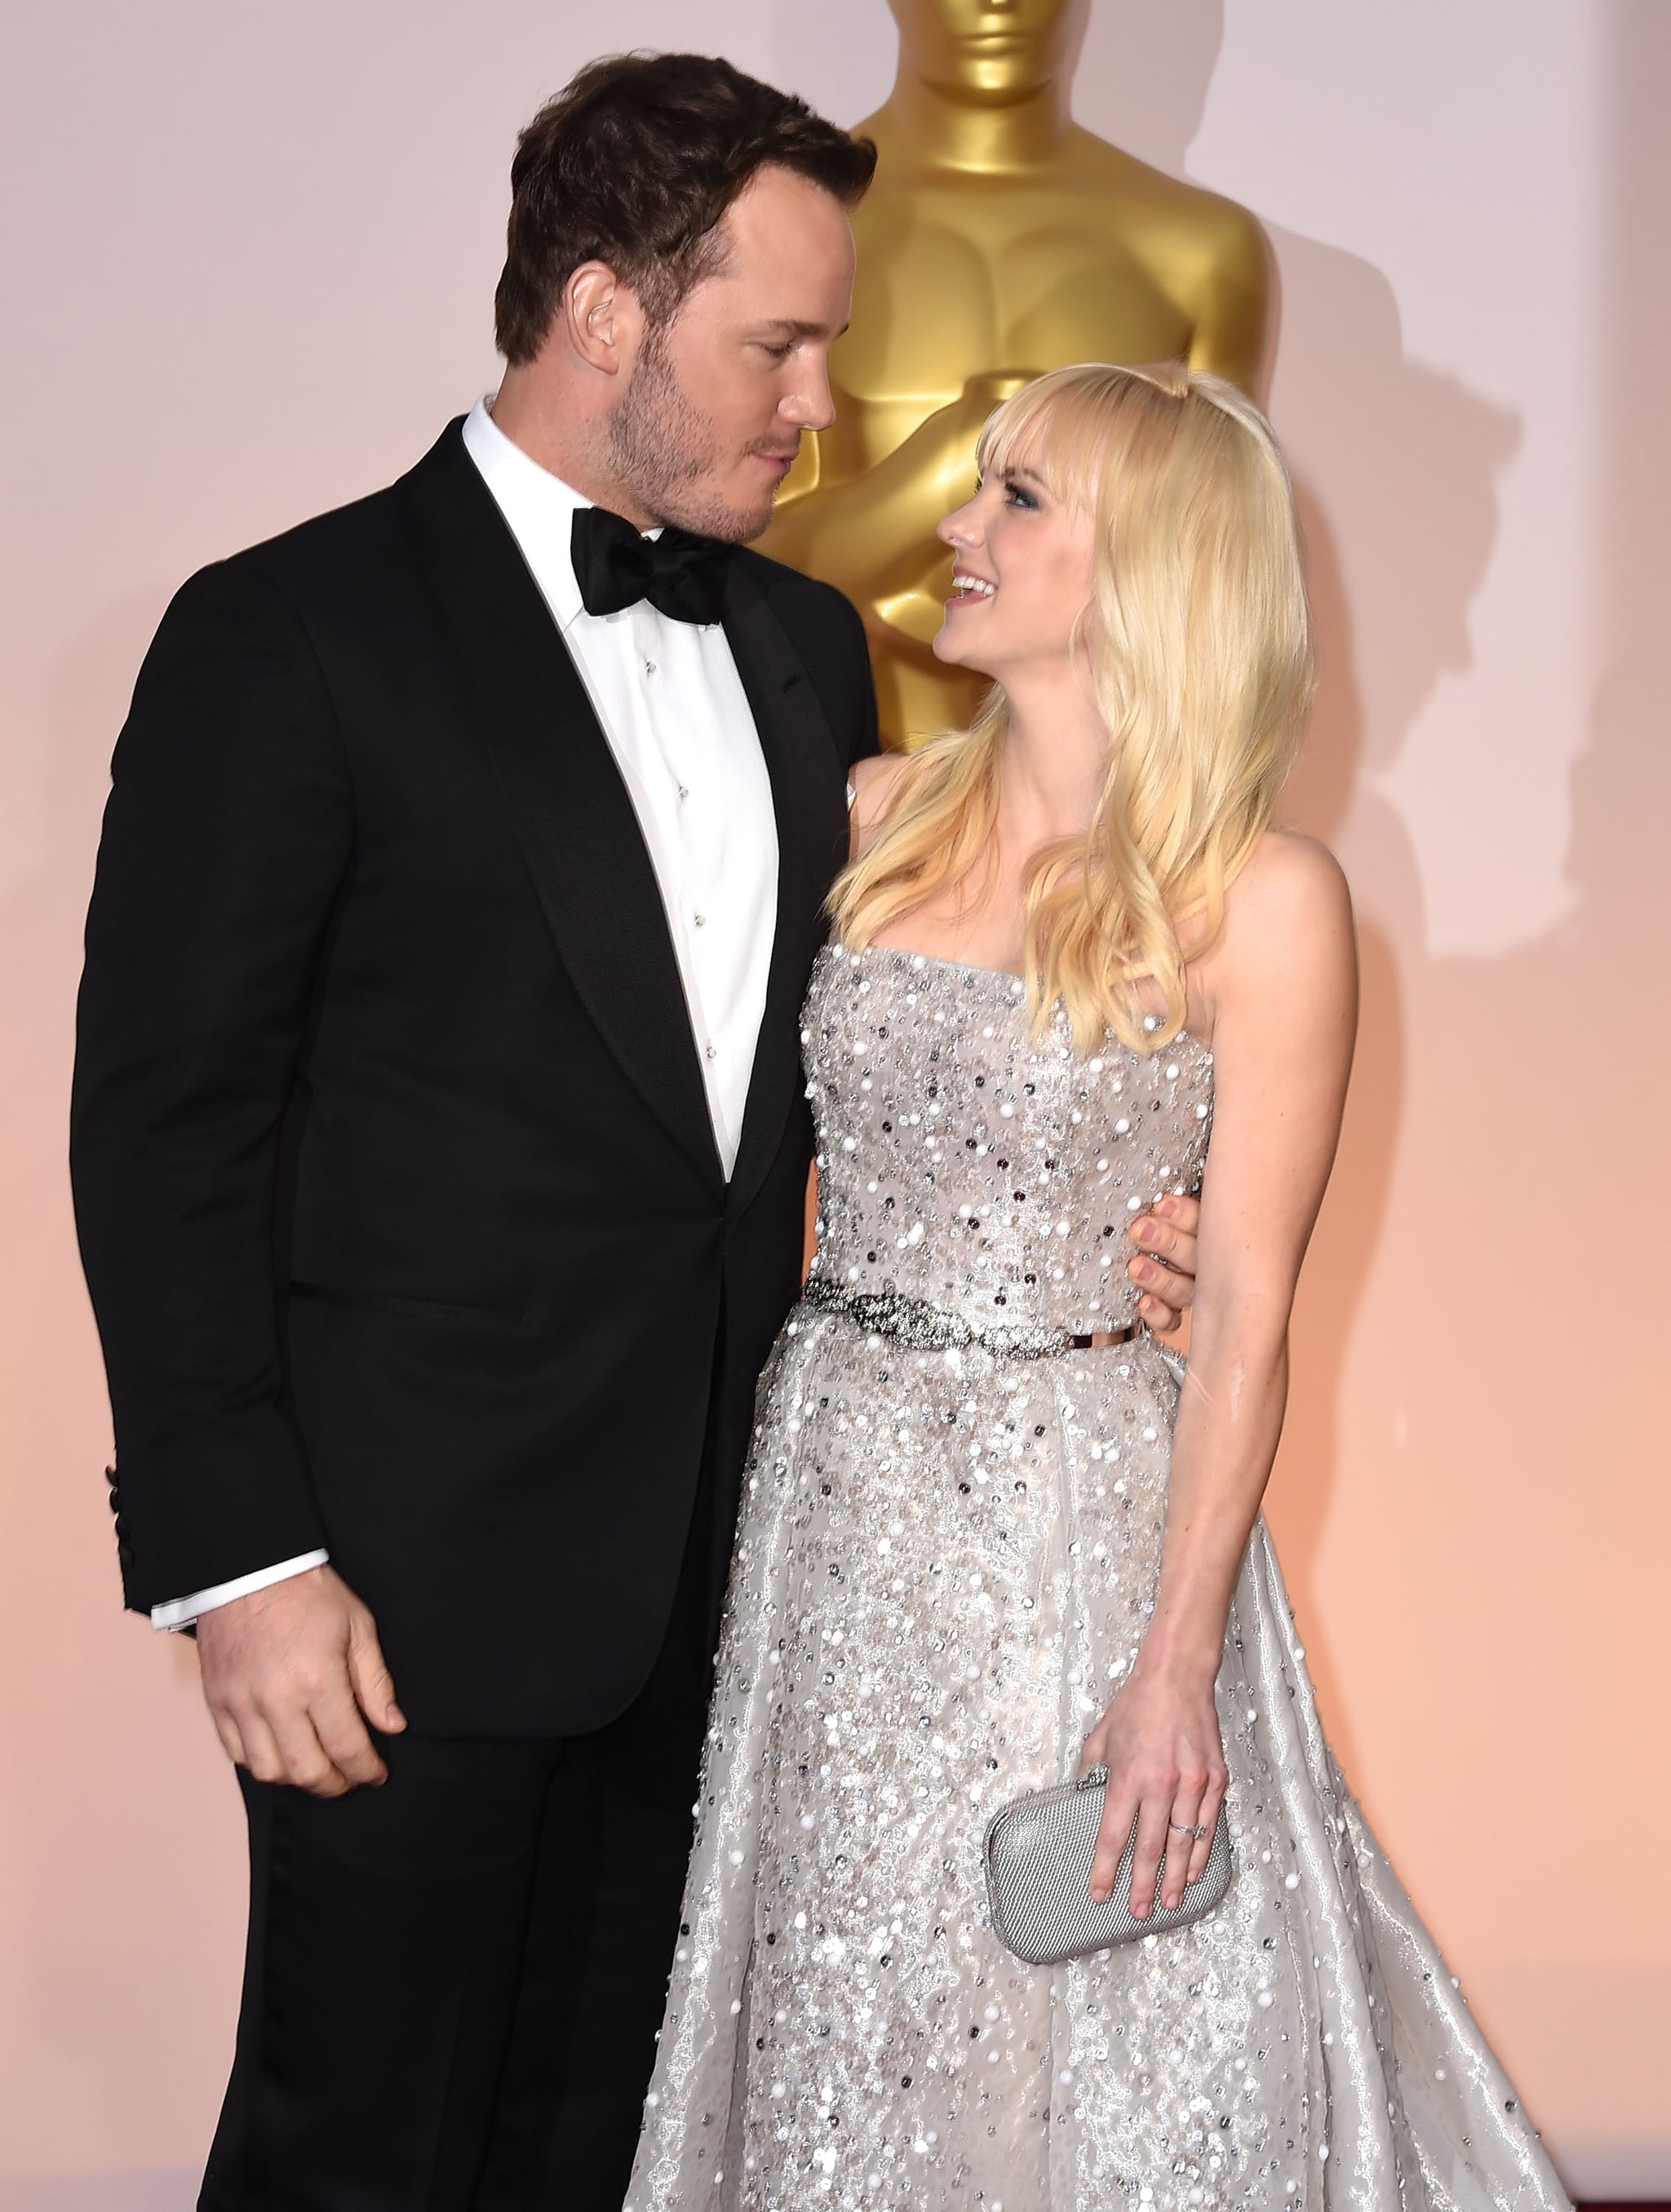 Jack Anna Faris Porn - Chris Pratt and Anna Faris | These Celebrity Love Stories Are Right Out of  a Fairy Tale | POPSUGAR Celebrity Photo 17